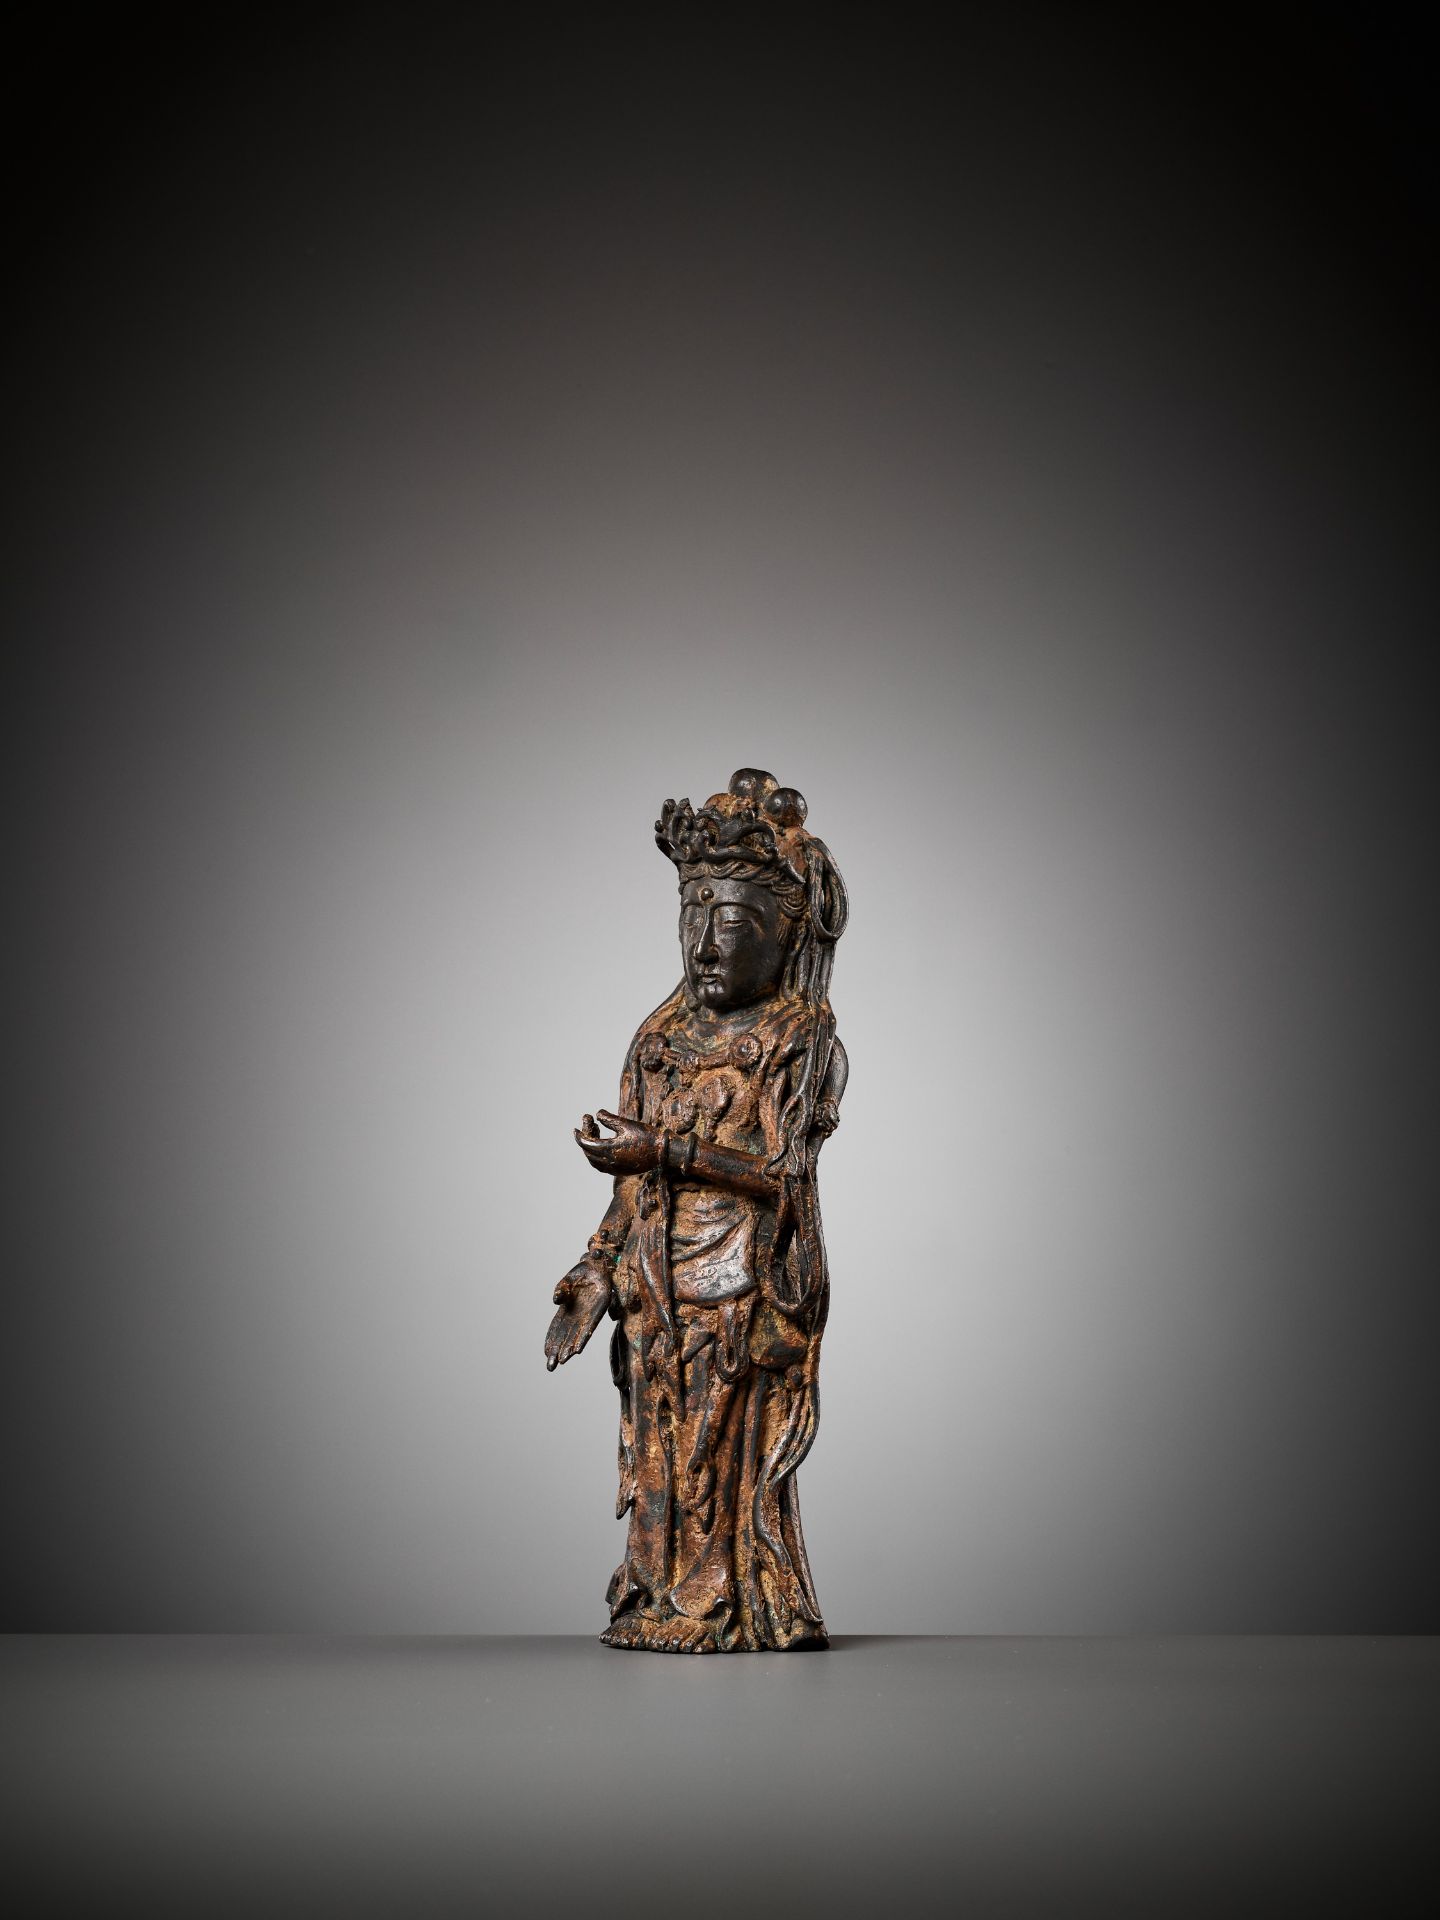 AN EXCEEDINGLY RARE BRONZE FIGURE OF GUANYIN, DALI KINGDOM, 12TH - MID-13TH CENTURY - Image 16 of 20